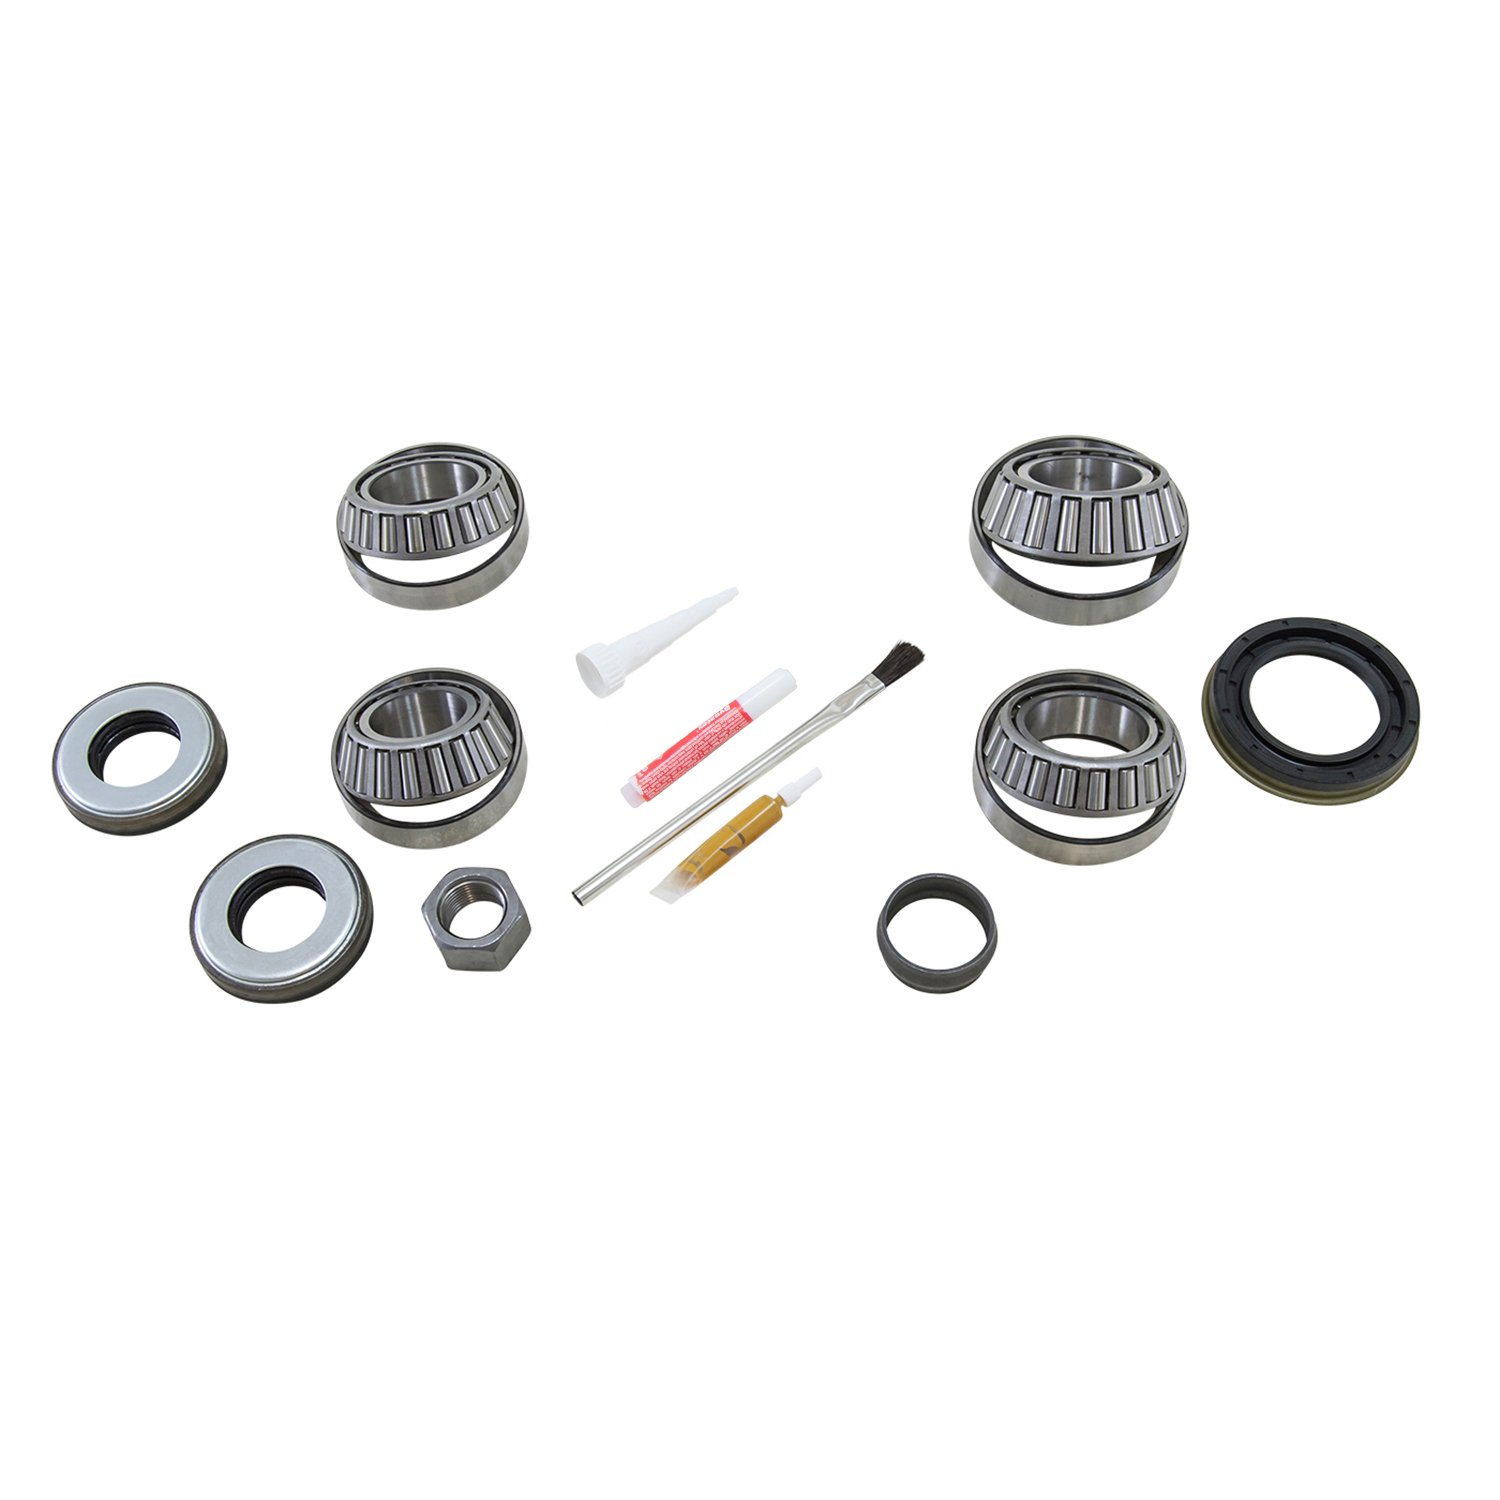 USA Standard 58021 Bearing Kit, For '99-'13 GM 8.25 in. Ifs Front